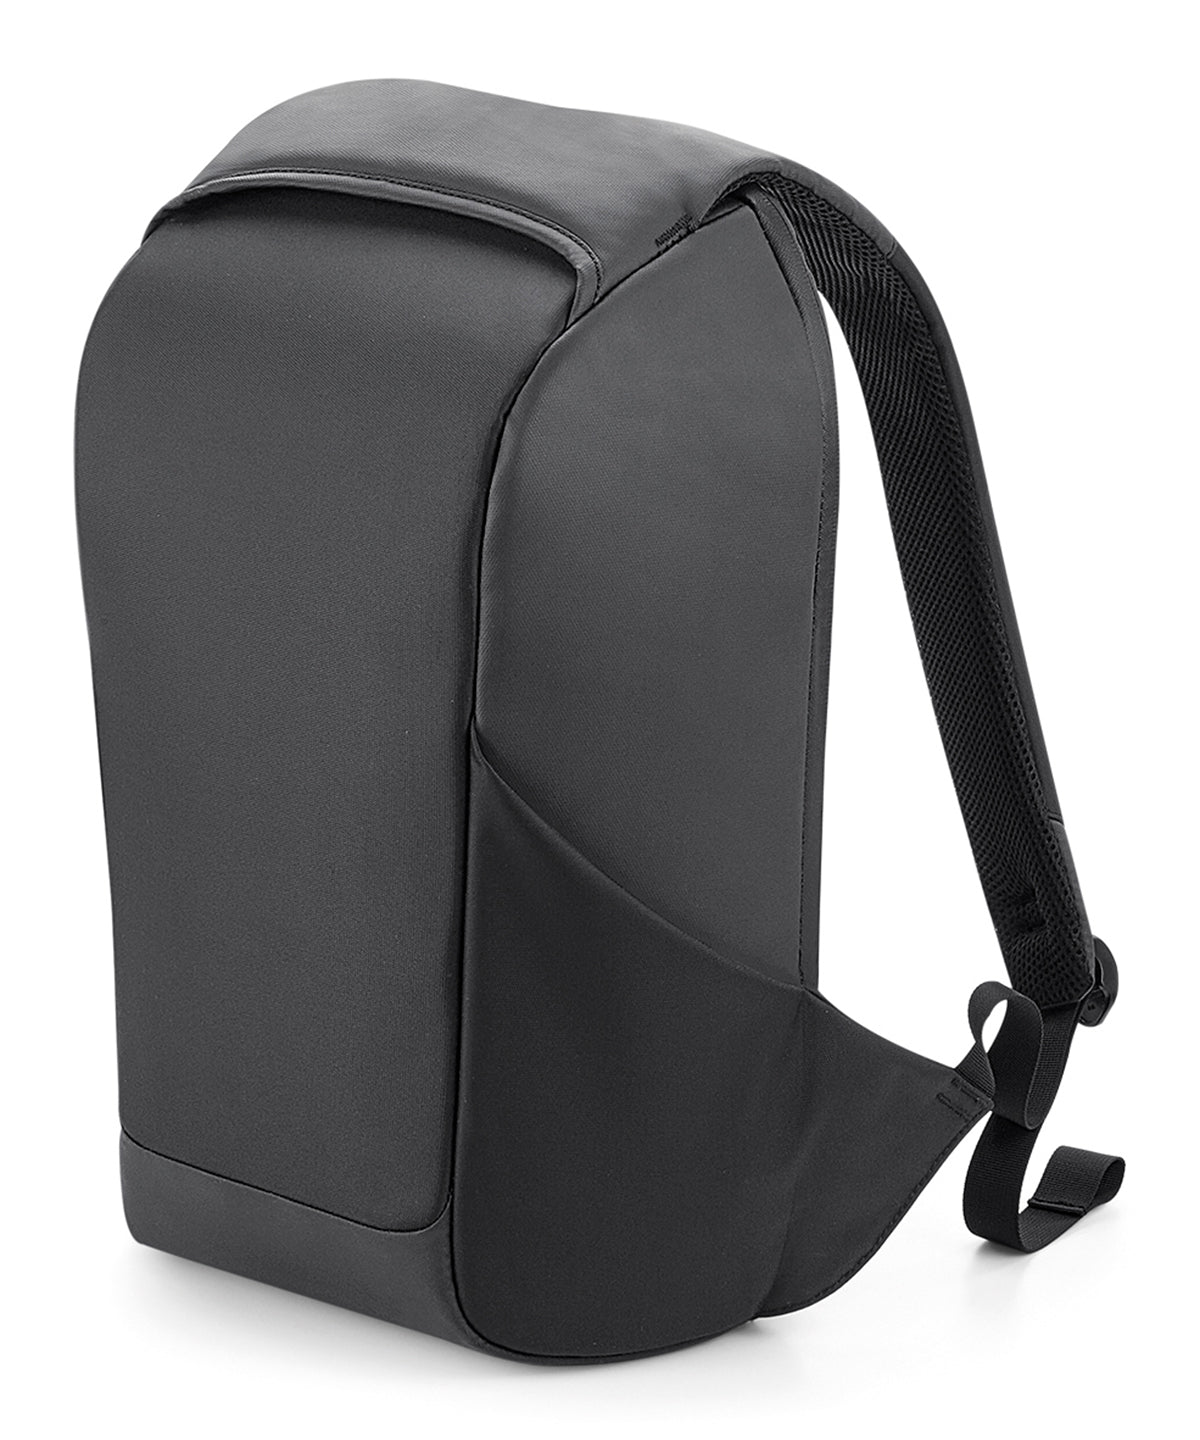 Töskur - Project Charge Security Backpack